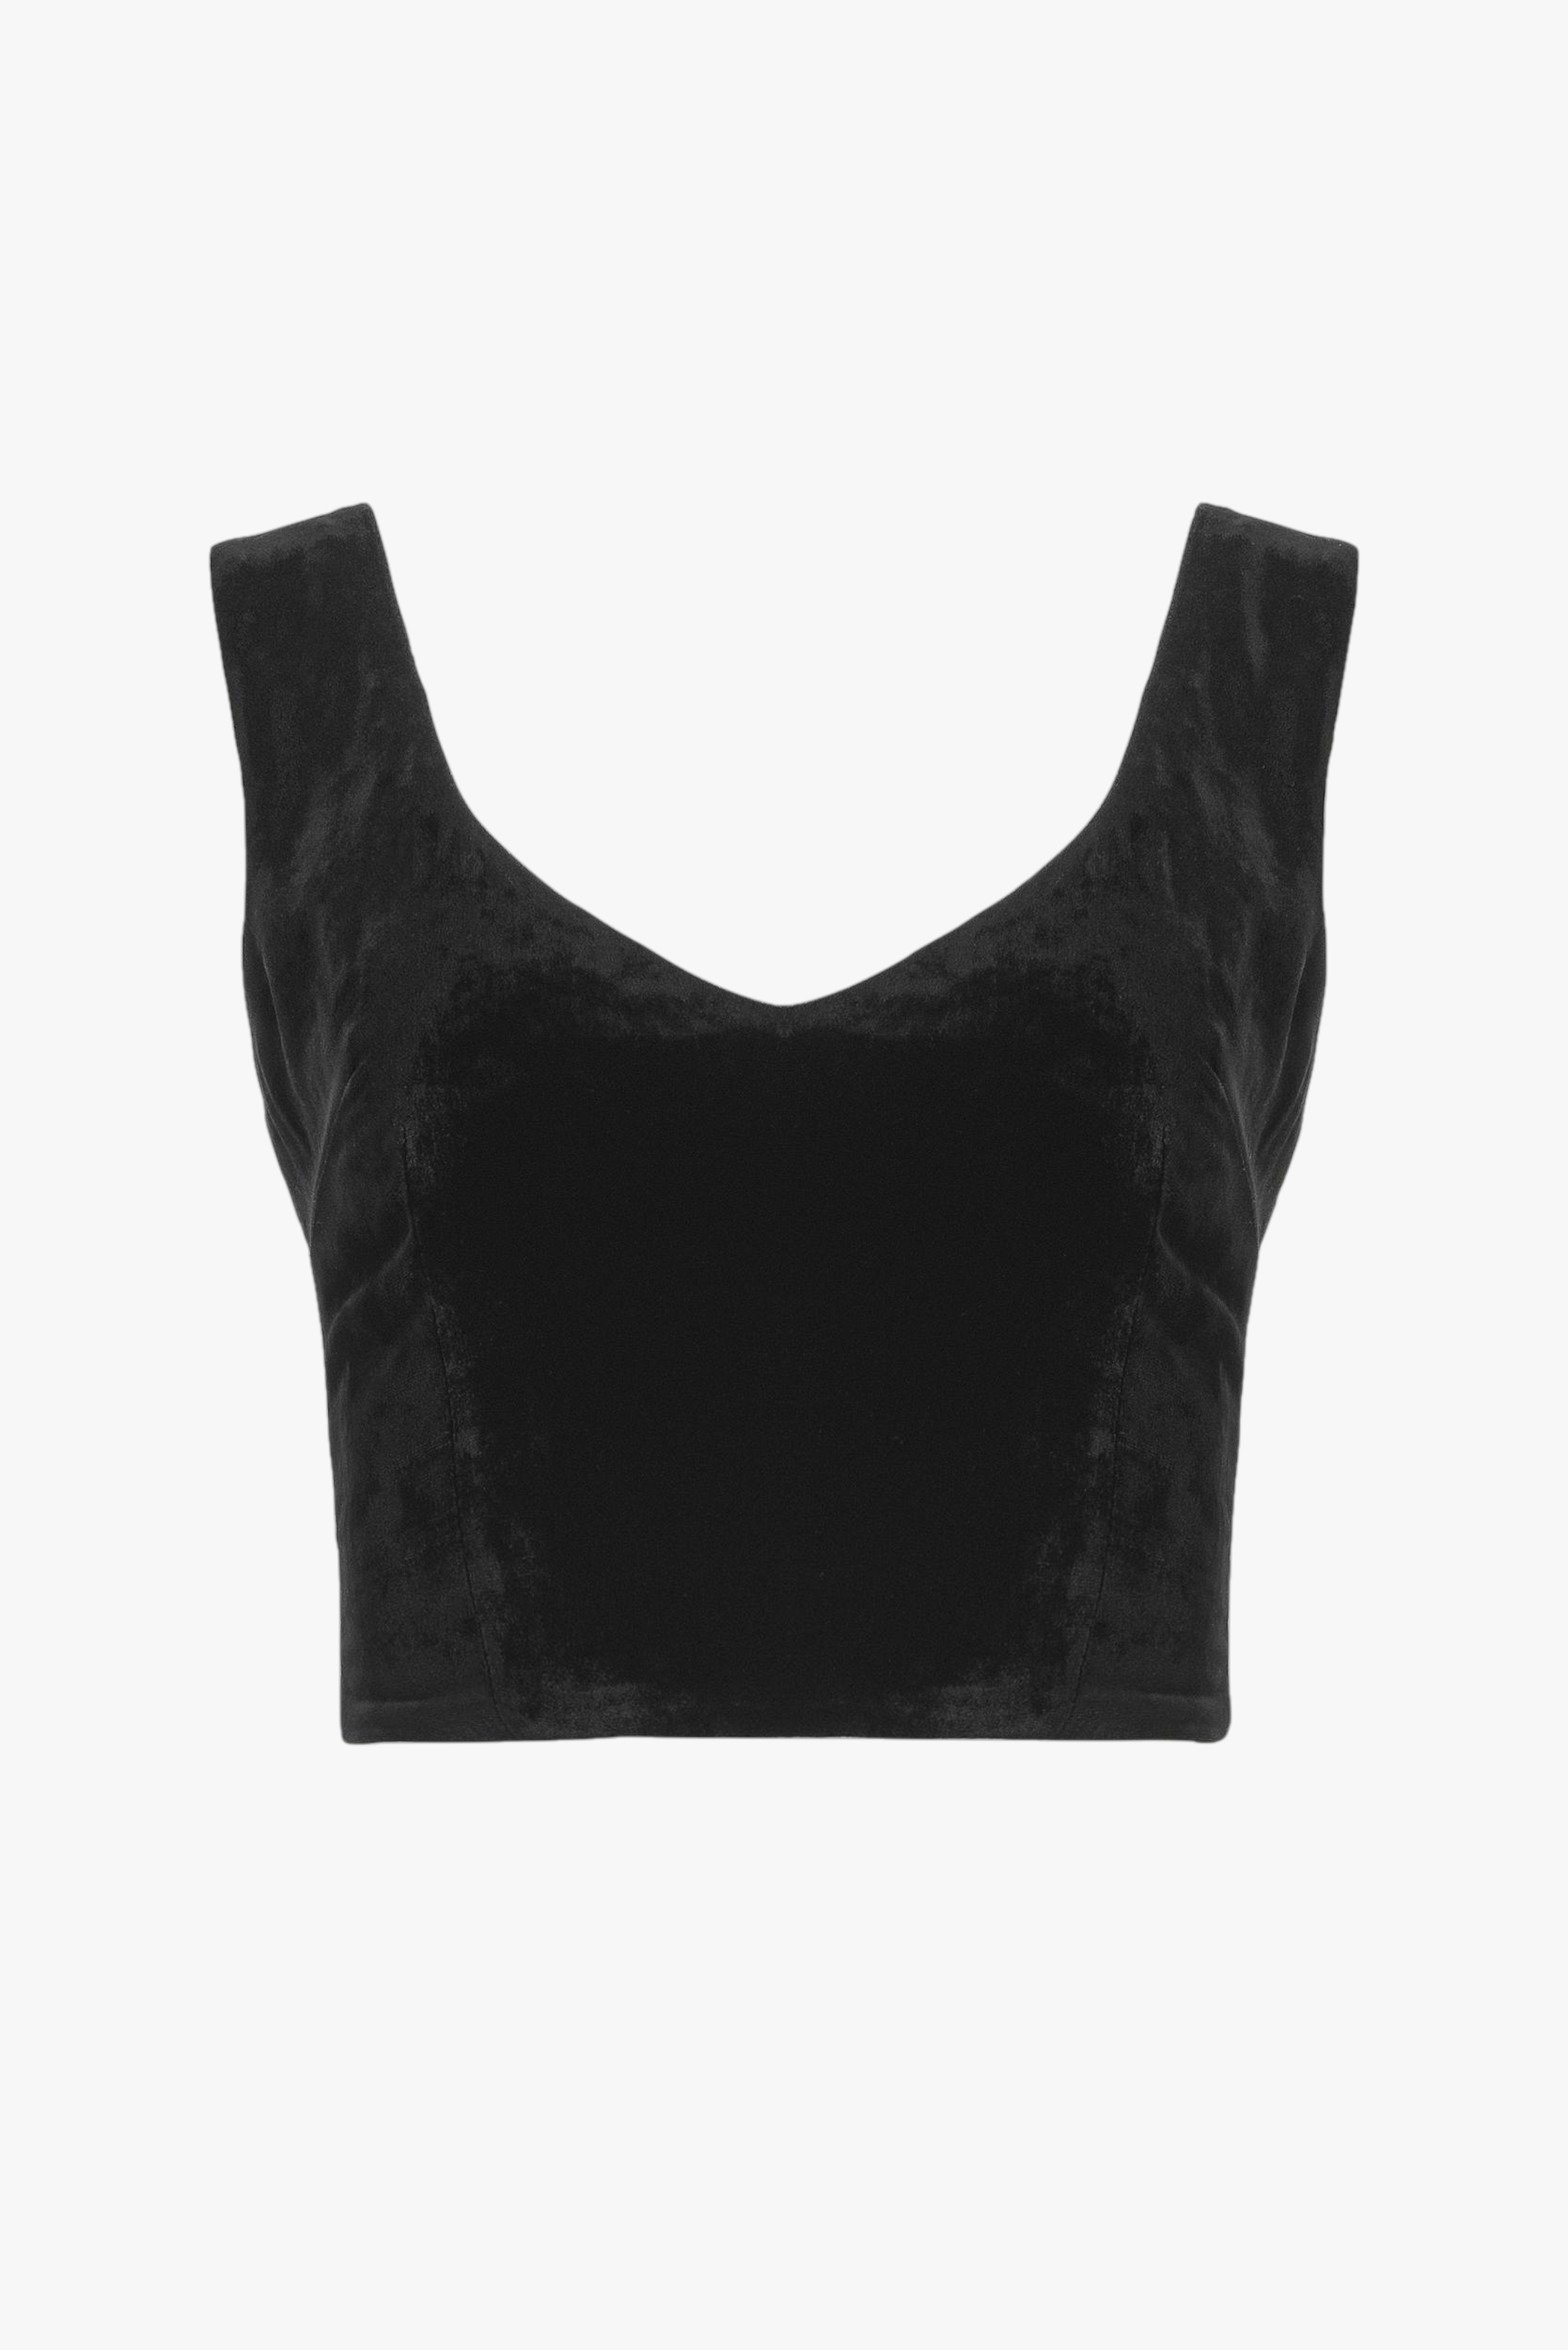 Shop The Silk Velvet Crop Top from Lita Couture at Seezona